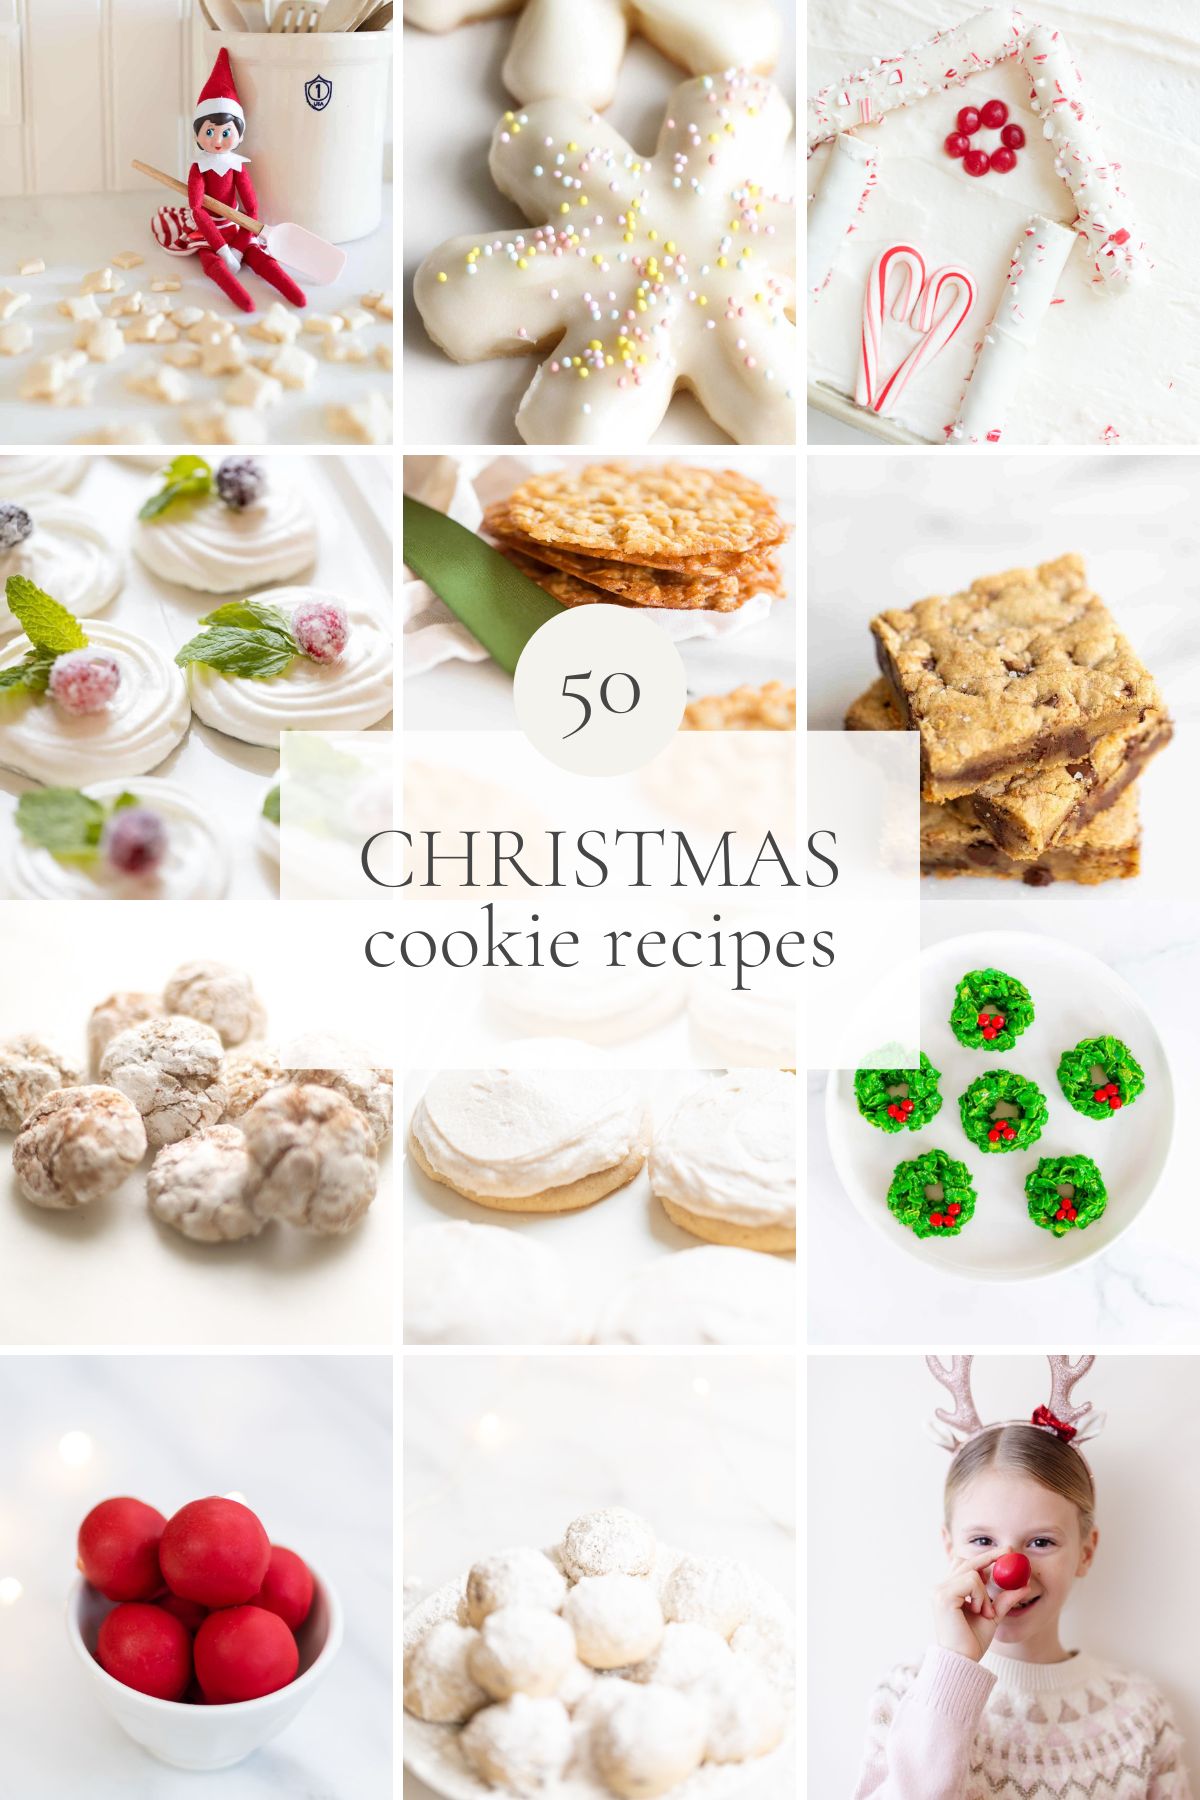 Discover a mouthwatering collection of 50 Christmas cookie recipes, perfect for the upcoming holiday season. From classic favorites to unique and festive creations, these Christmas cookies are sure to delight everyone at